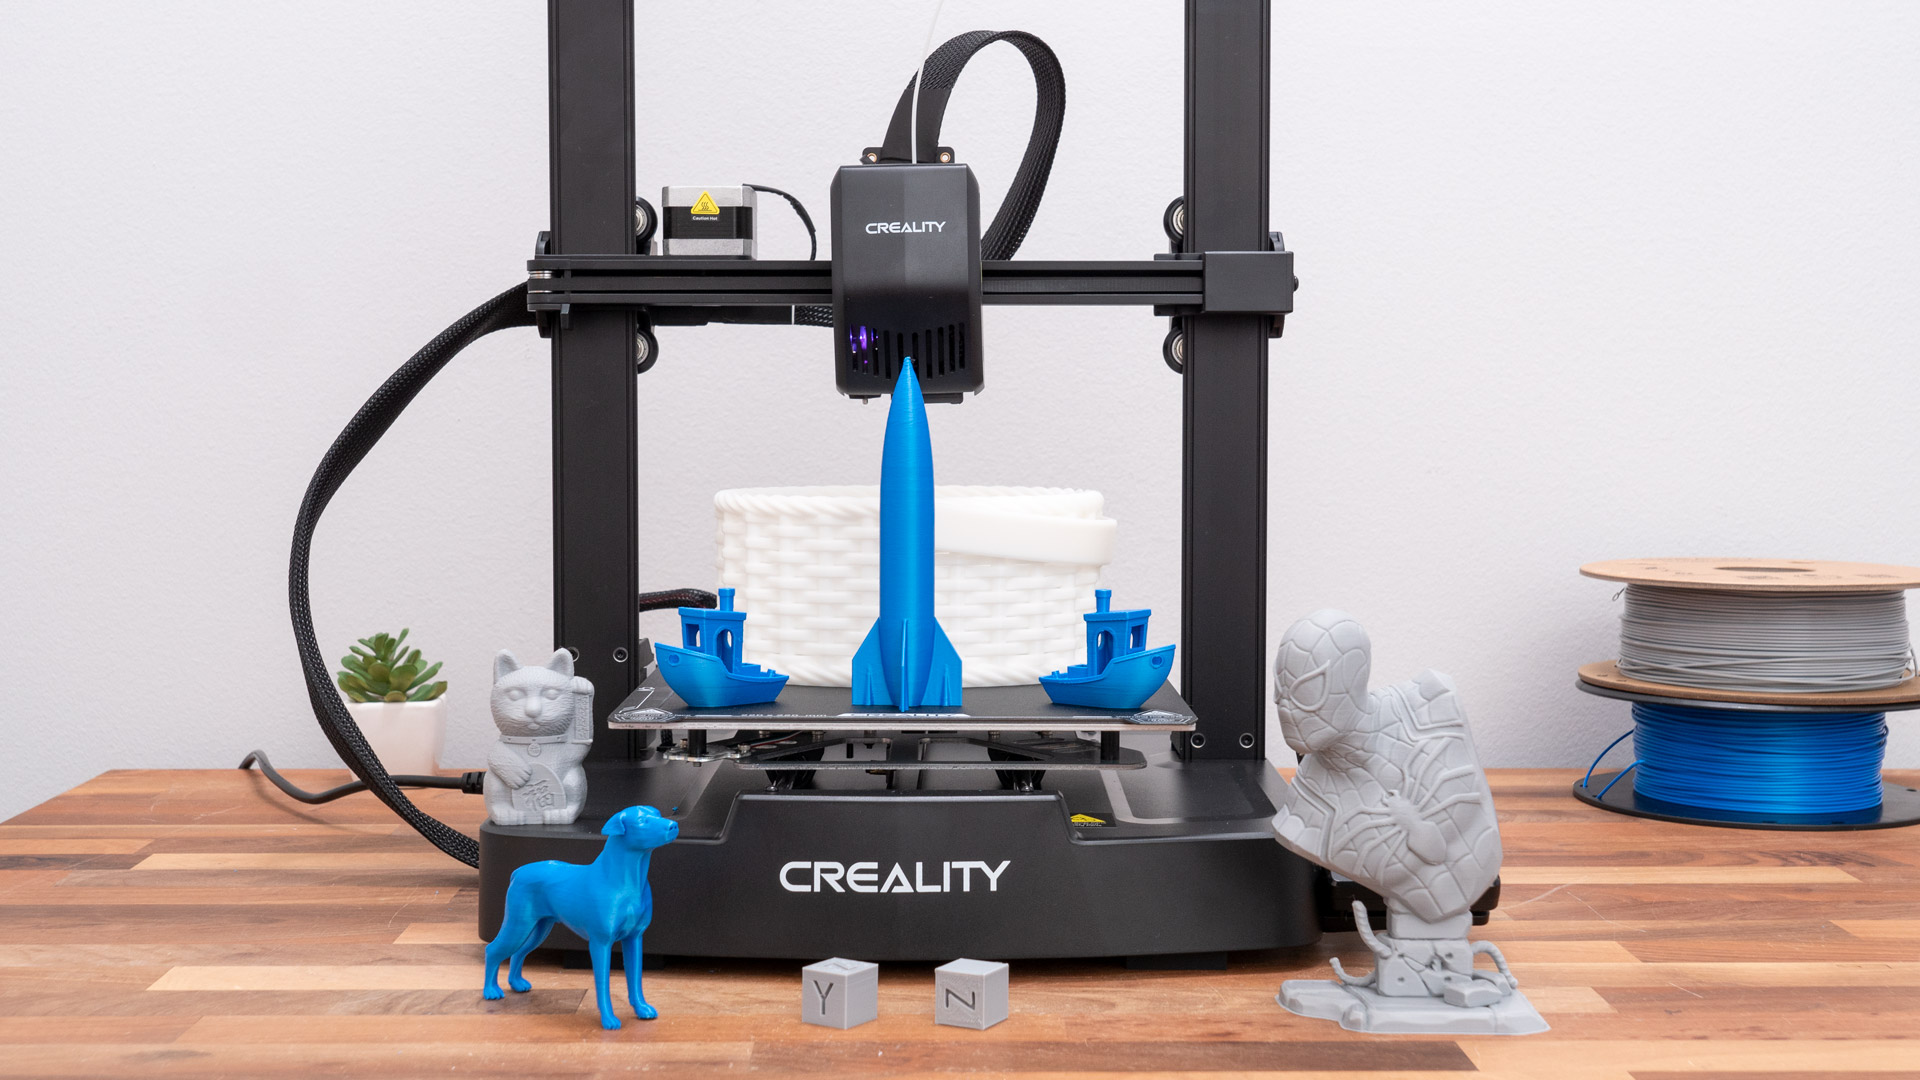 Creality-Ender-3-V3-SE-Review-with-Test-Prints-Outstanding-Value-.jpg